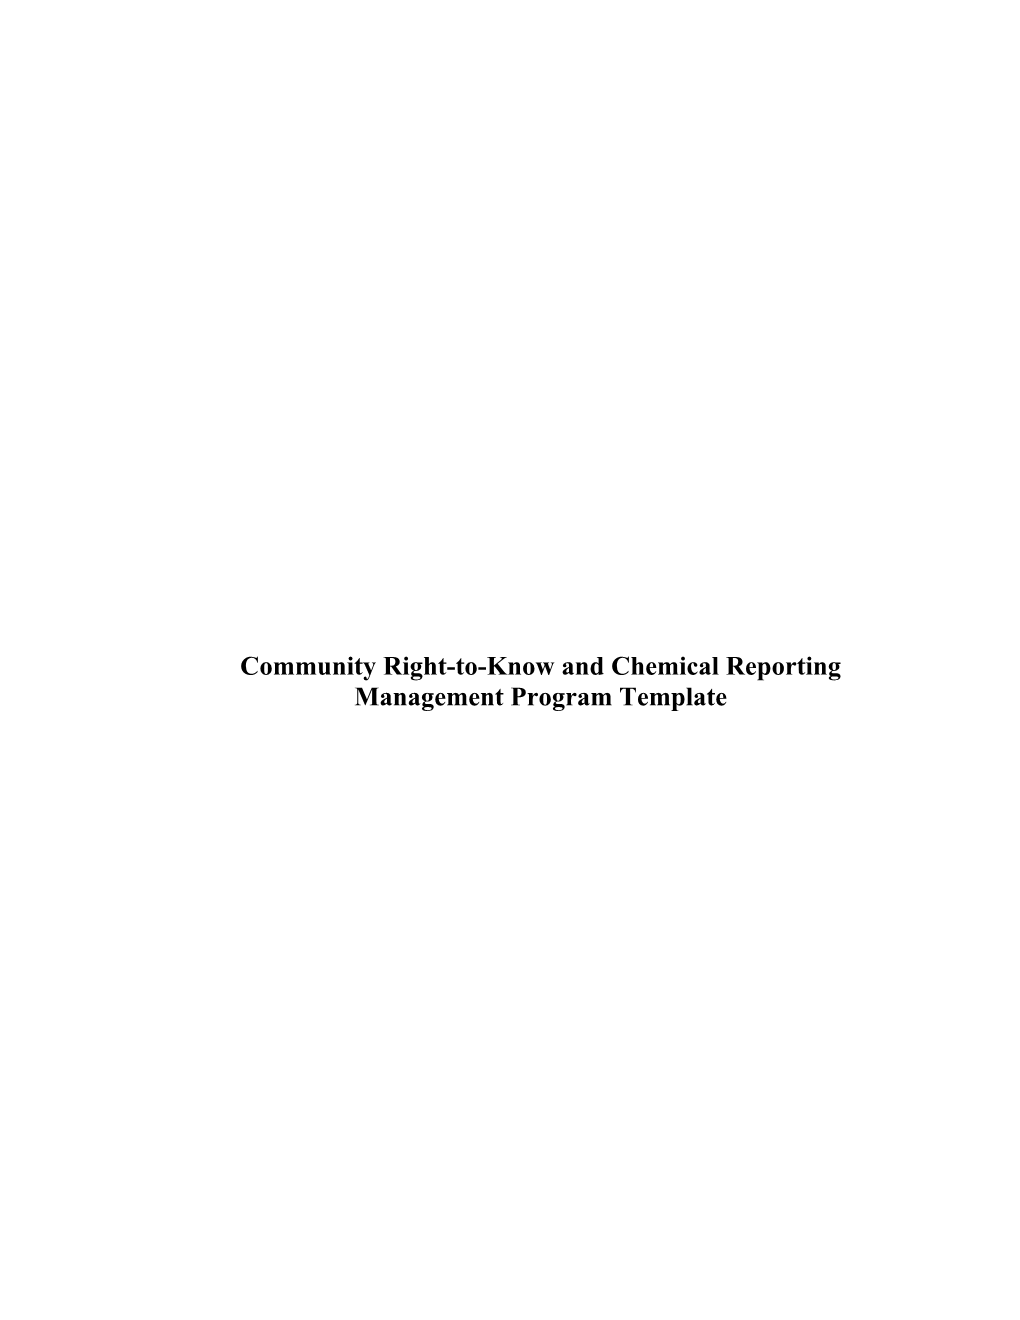 Community Right-To-Know and Chemical Reporting Management Program Template